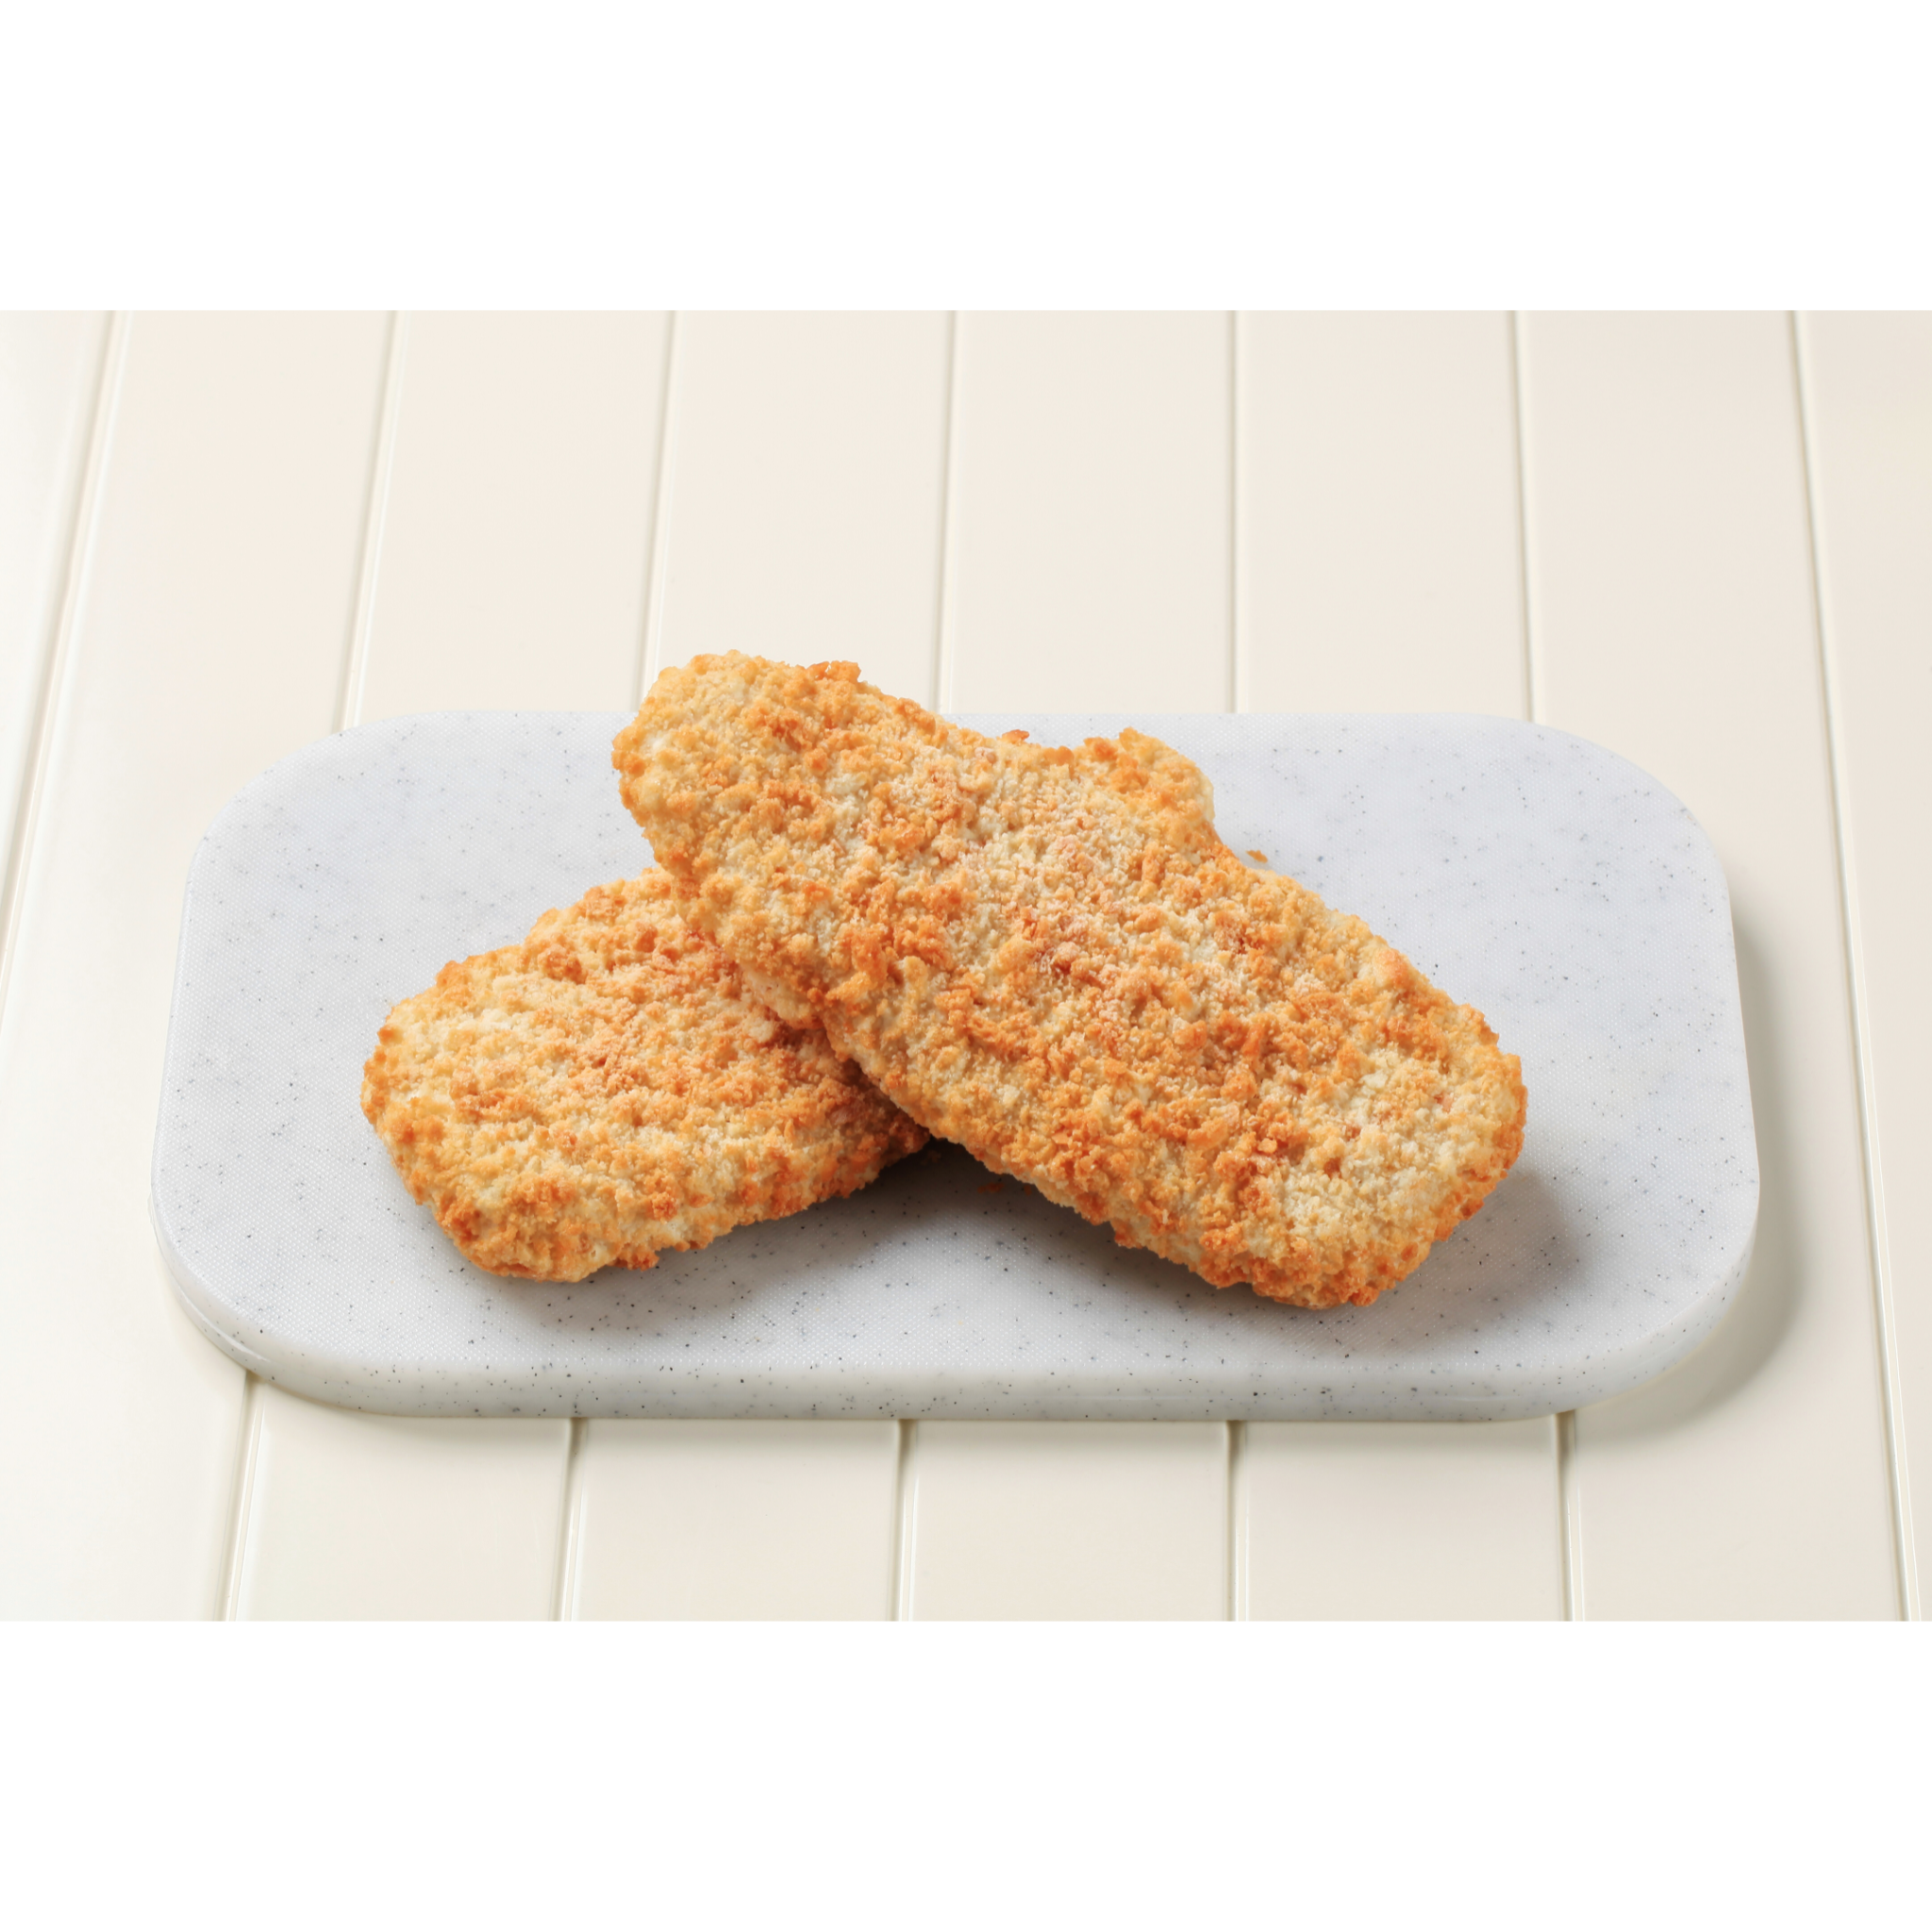 Crumbed Whiting frozen Fillets 1 KG from Steve Costi Seafood